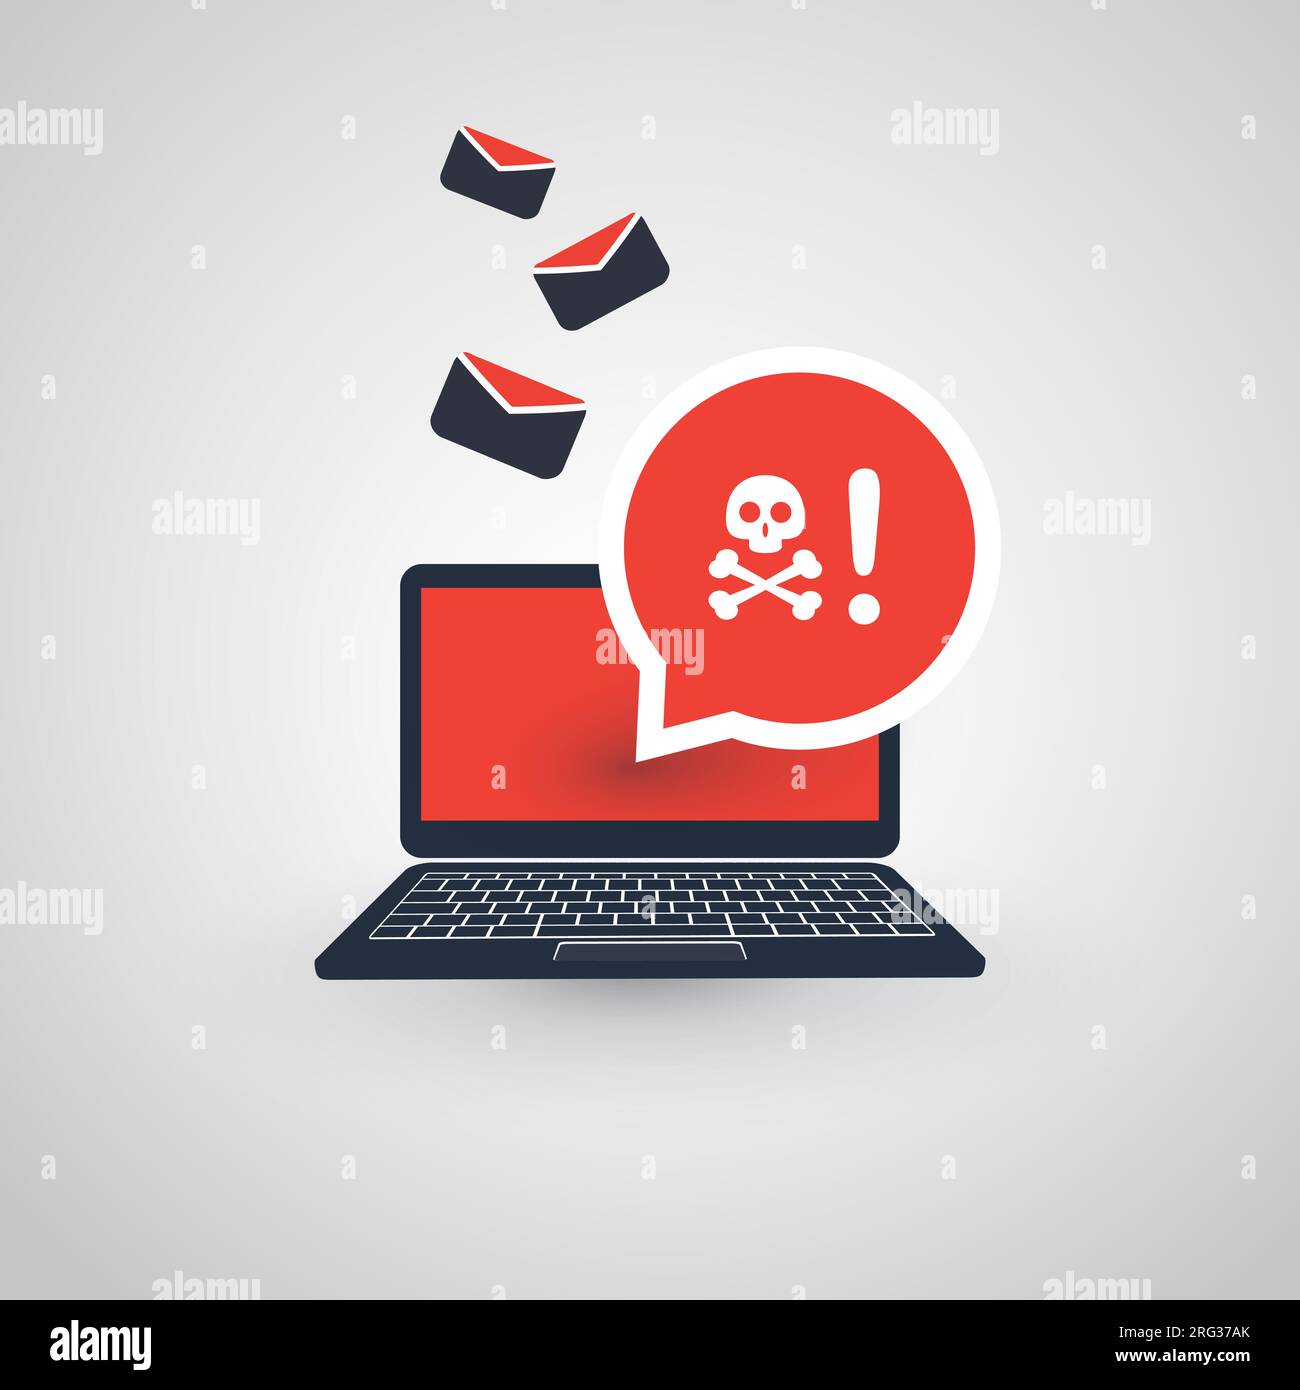 Laptop and Envelopes - Malware Attack Warning, Infection by E-mail - Virus, Backdoor, Ransomware, Fraud, Spam, Phishing, Email Scam, Hacked Computer - Stock Vector